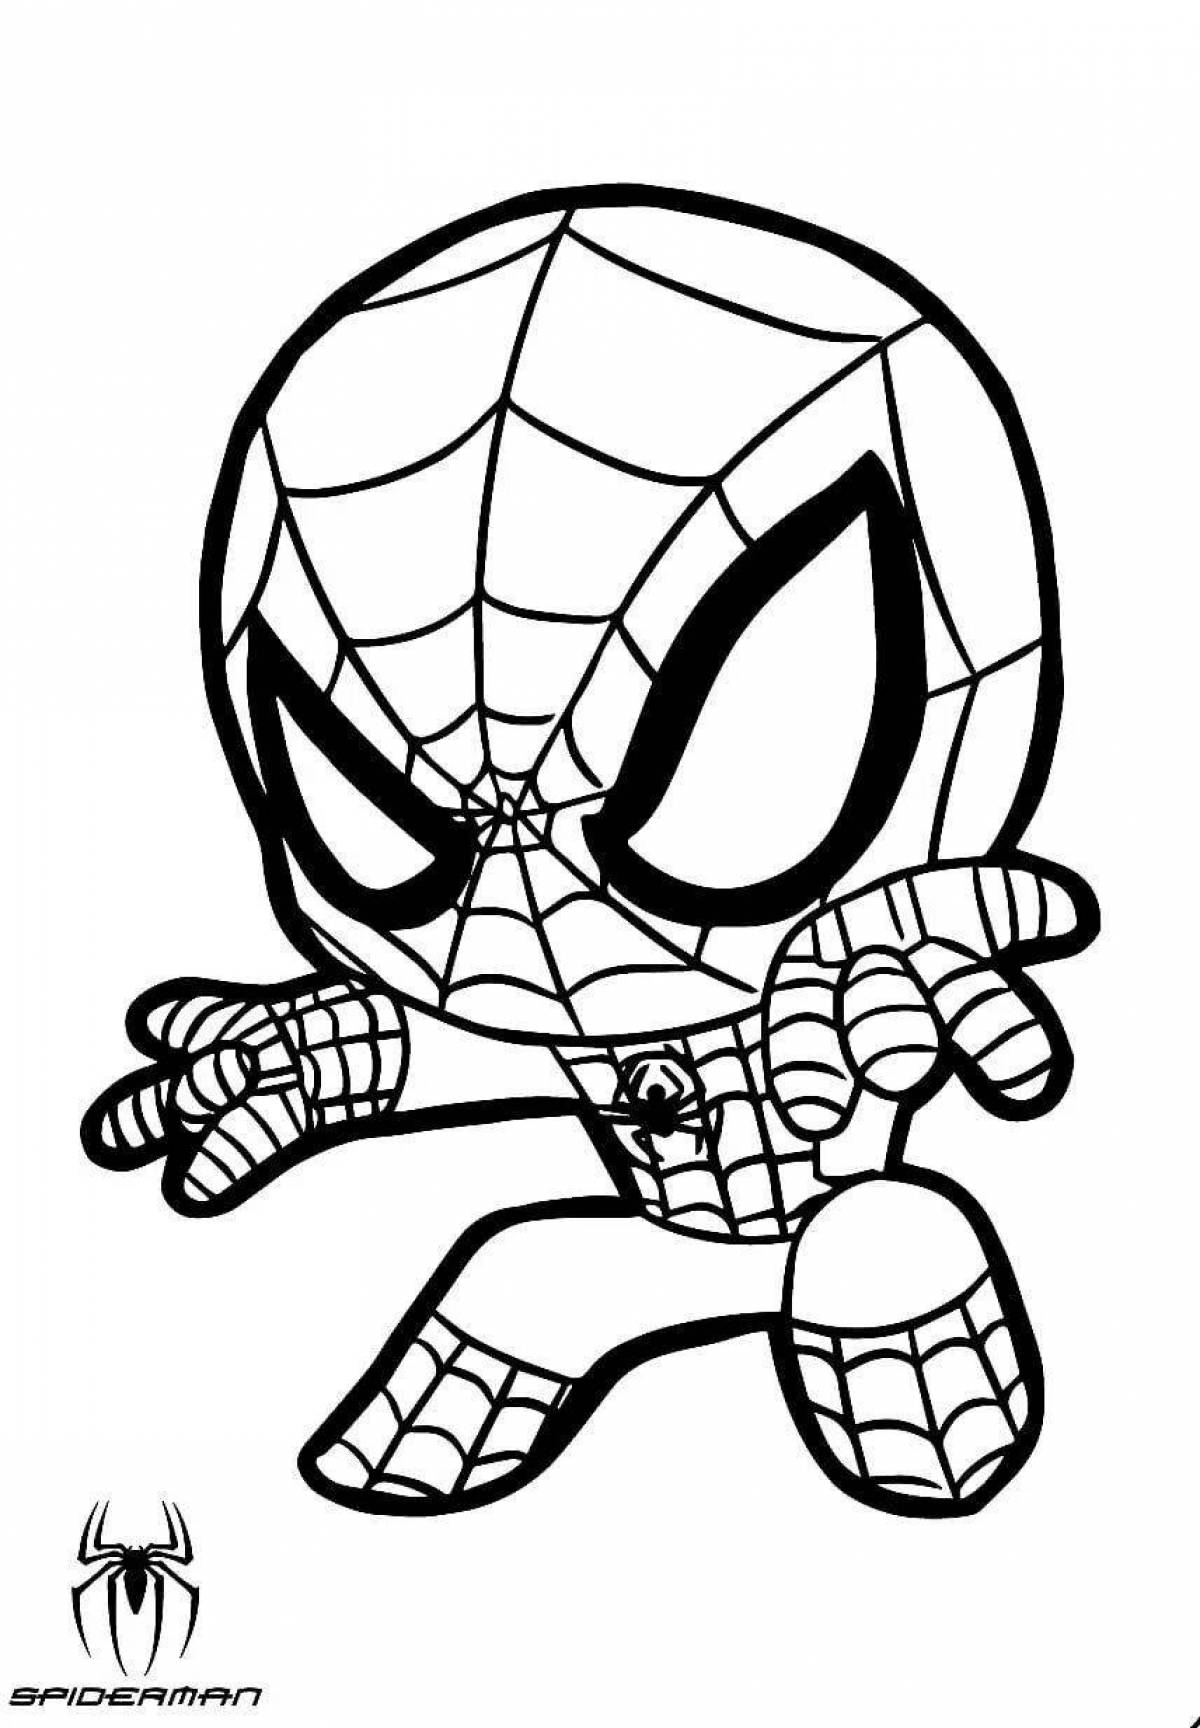 Spiderman's spooky ghost coloring page